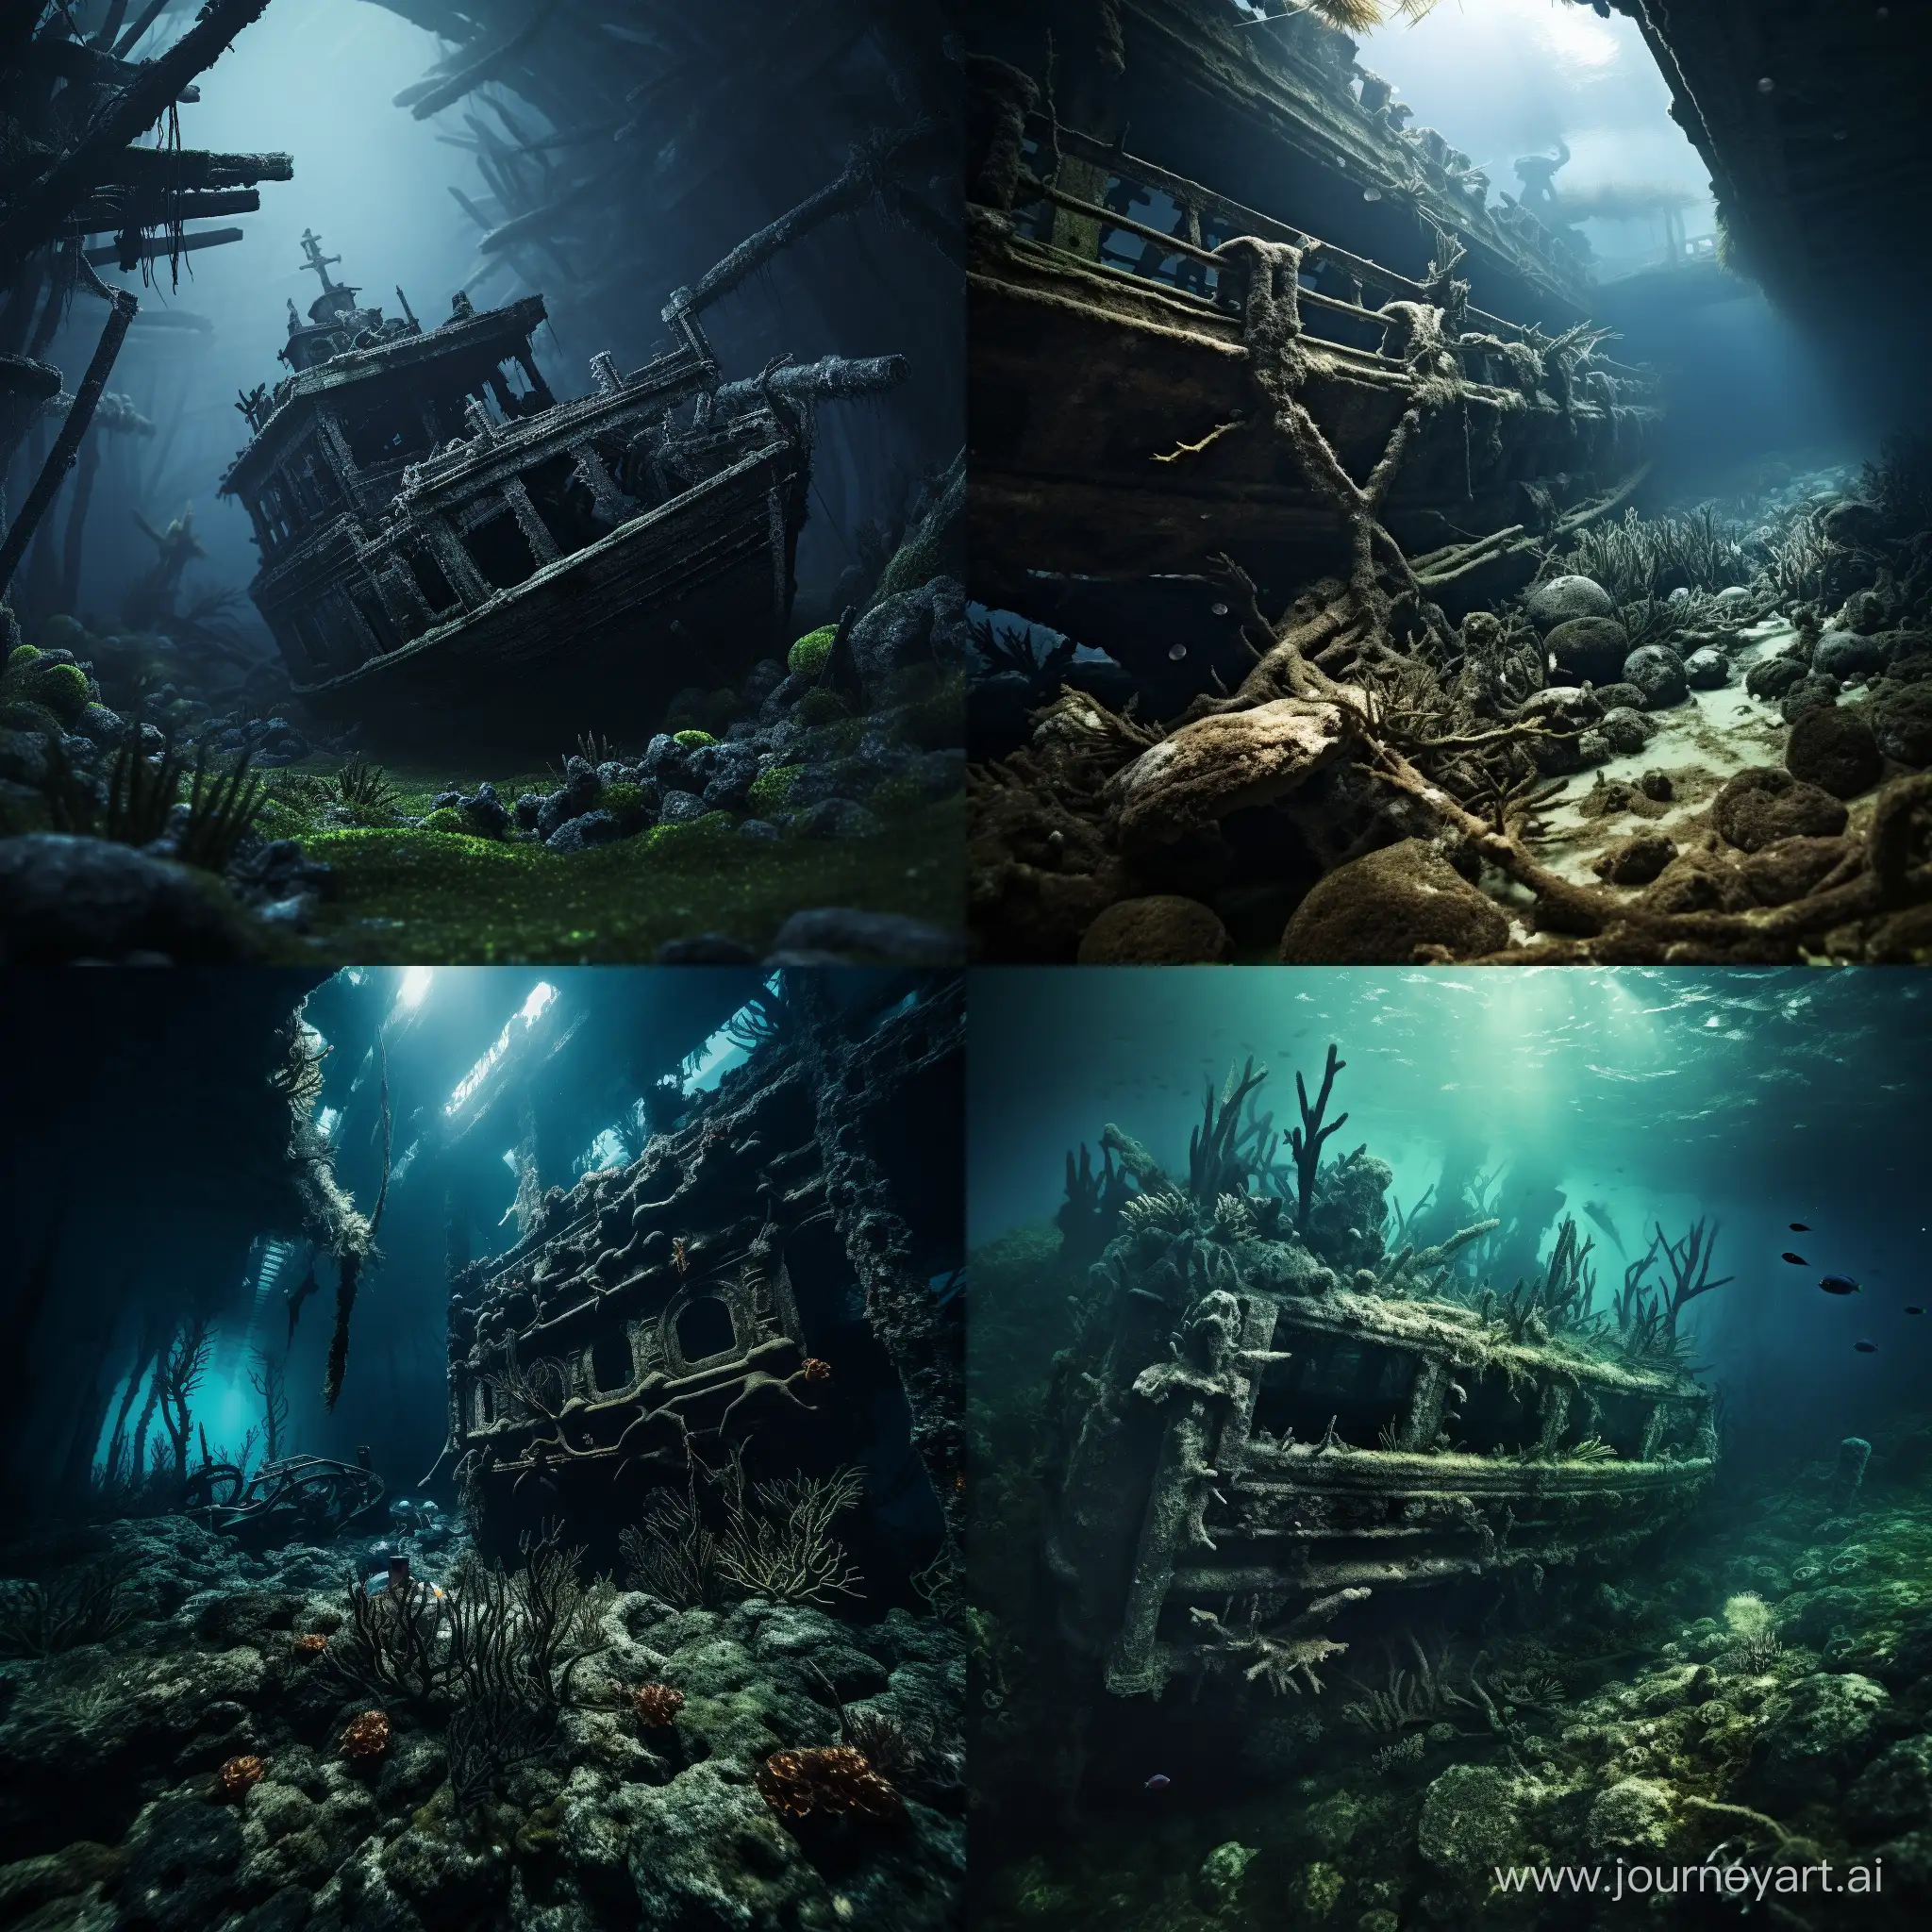 Mystical-Shipwreck-Sunken-Treasures-and-Marine-Life-in-HR-Giger-Style